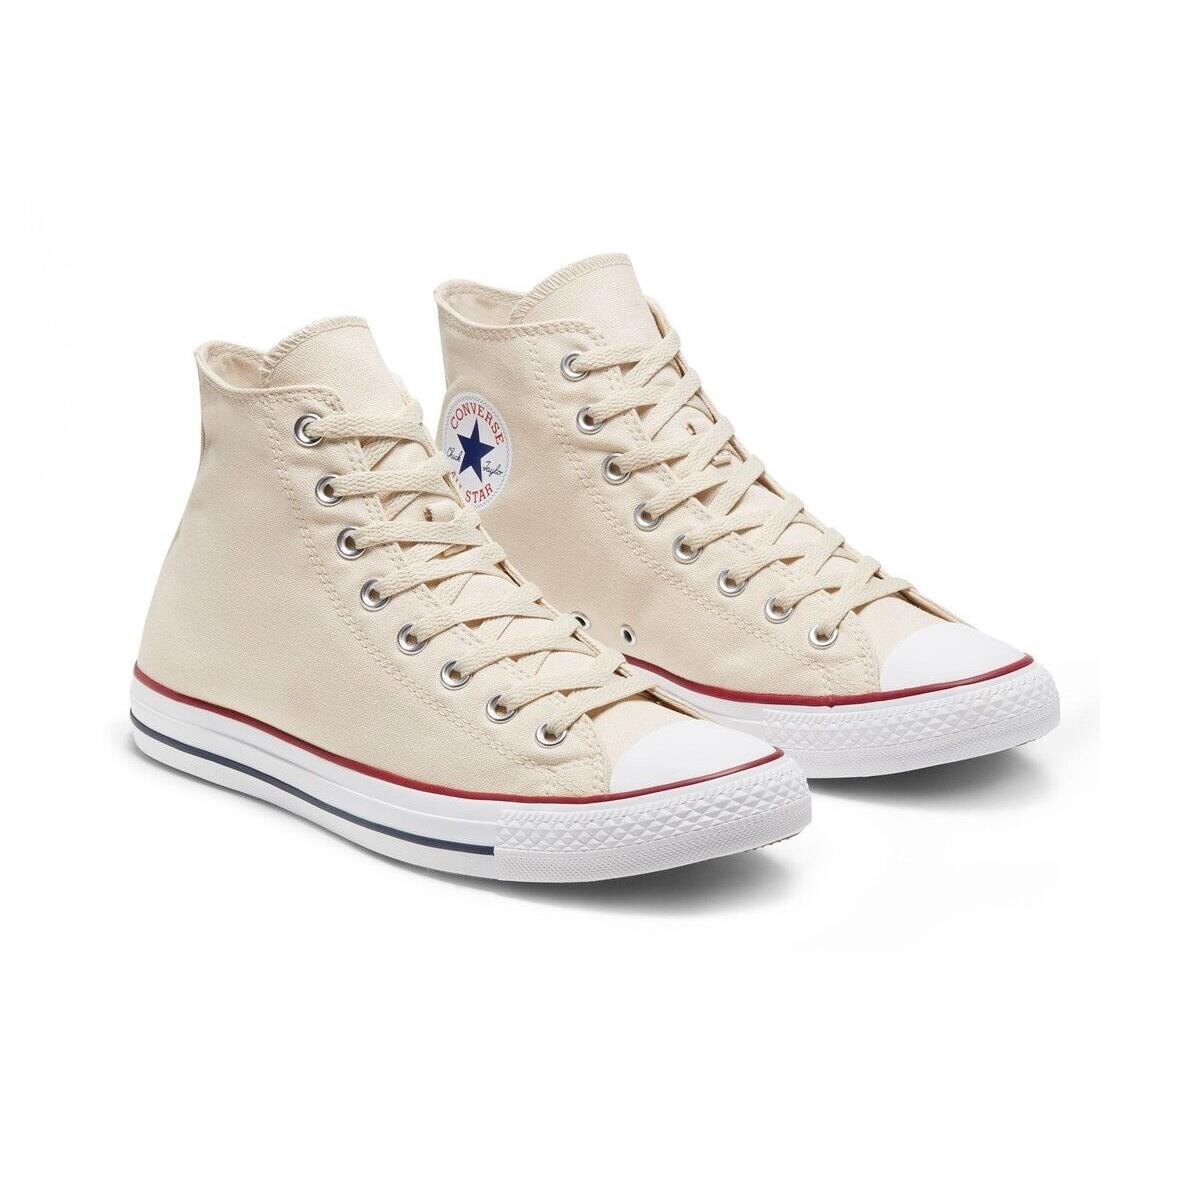 Converse Men`s Chuck Taylor All Star Classic High Top Sneaker Shoes Natural Ivory